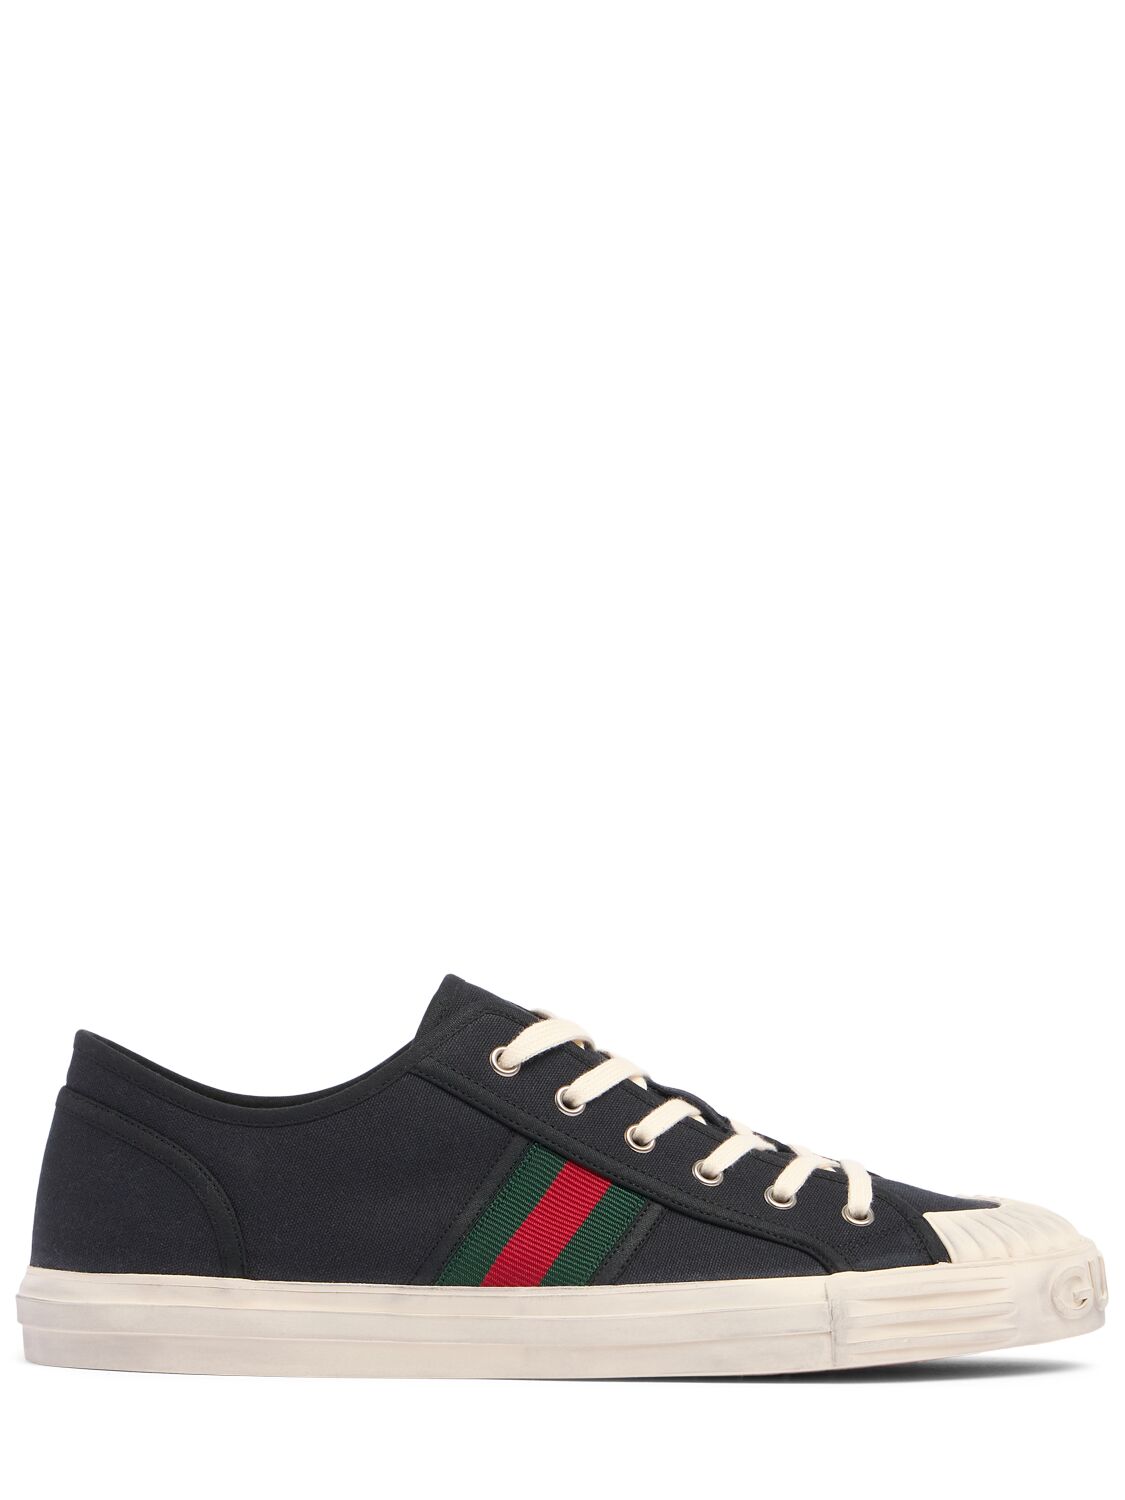 Gucci Julio Canvas Web Sneakers In Black/green/red